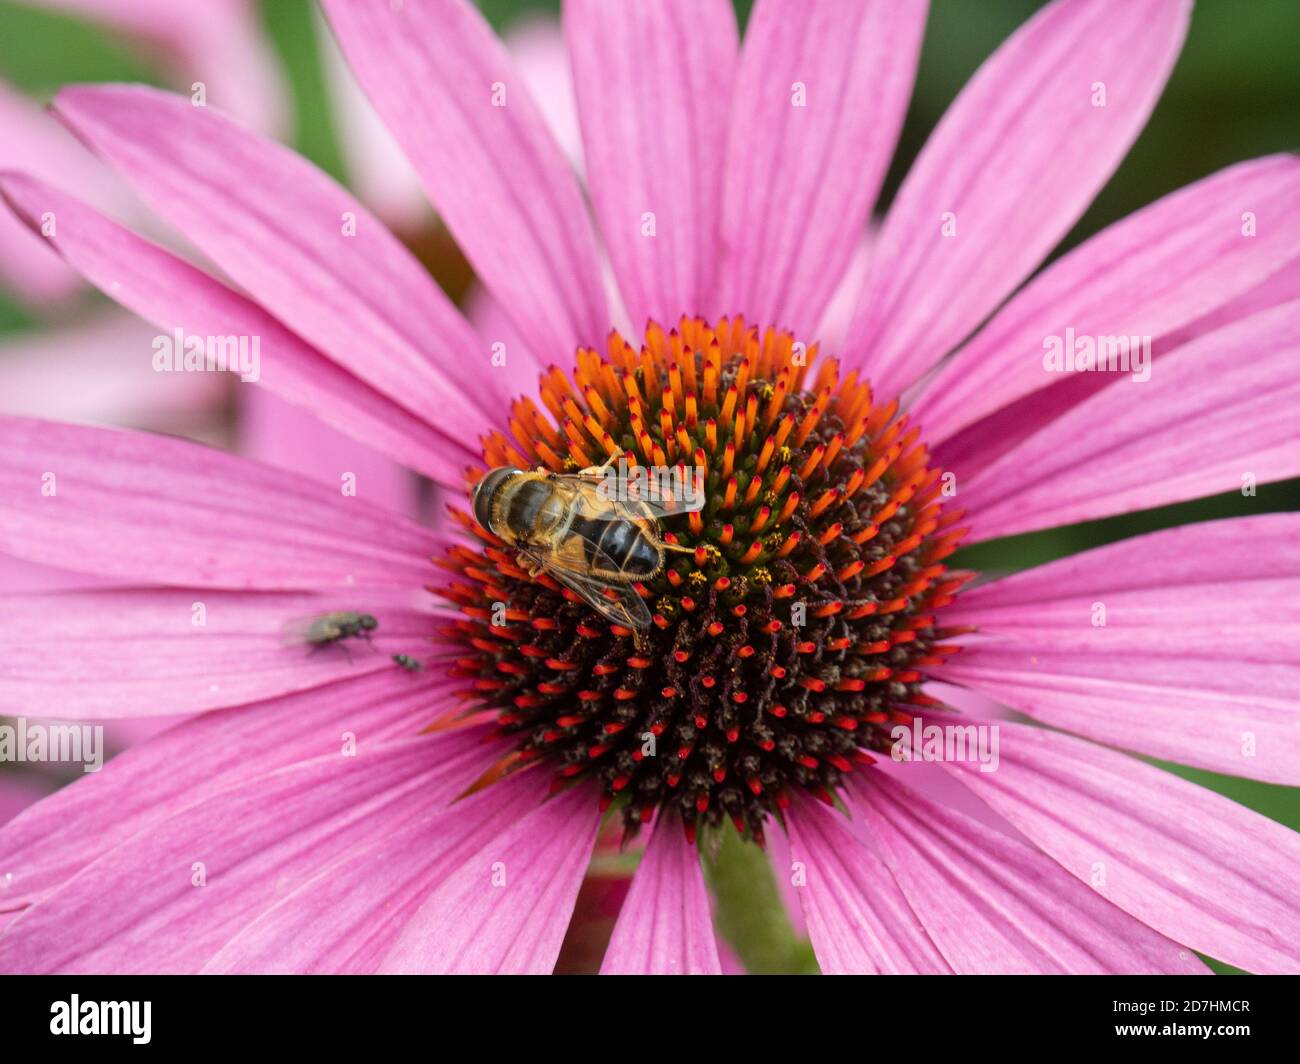 A close up of a honey bee feeding on an Echinacea flower Stock Photo